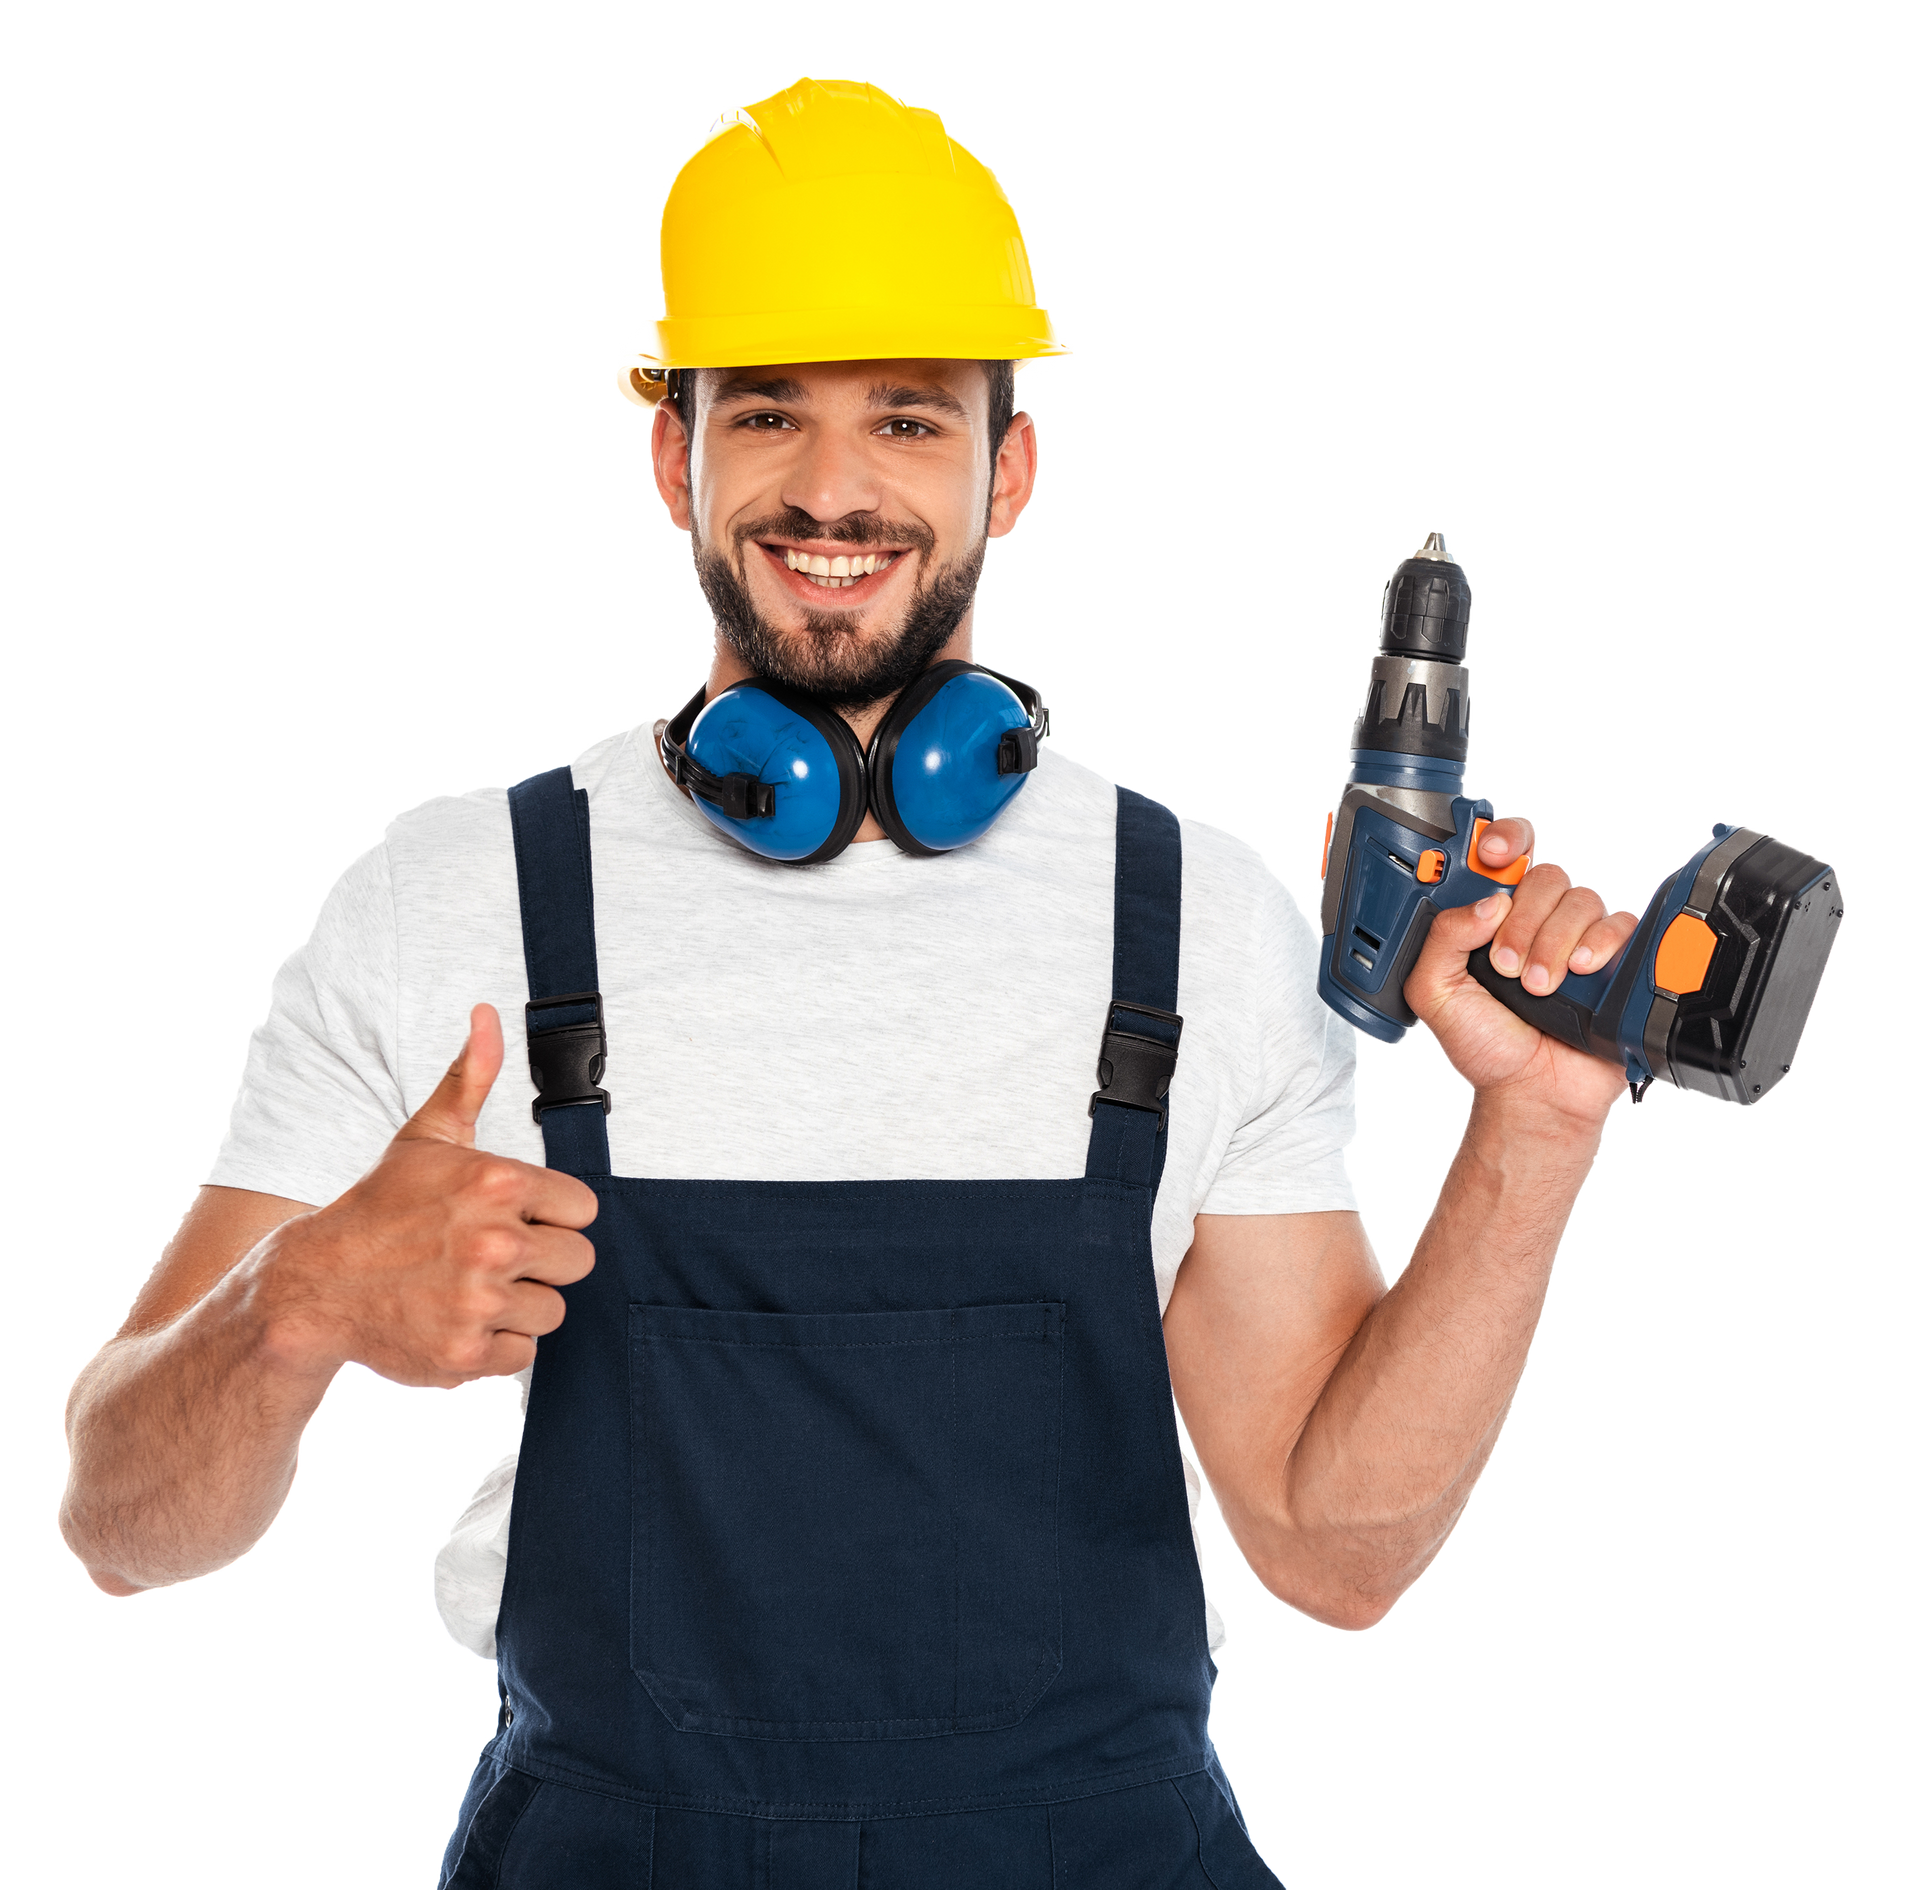 A man wearing a hard hat and overalls is holding a drill and giving a thumbs up.